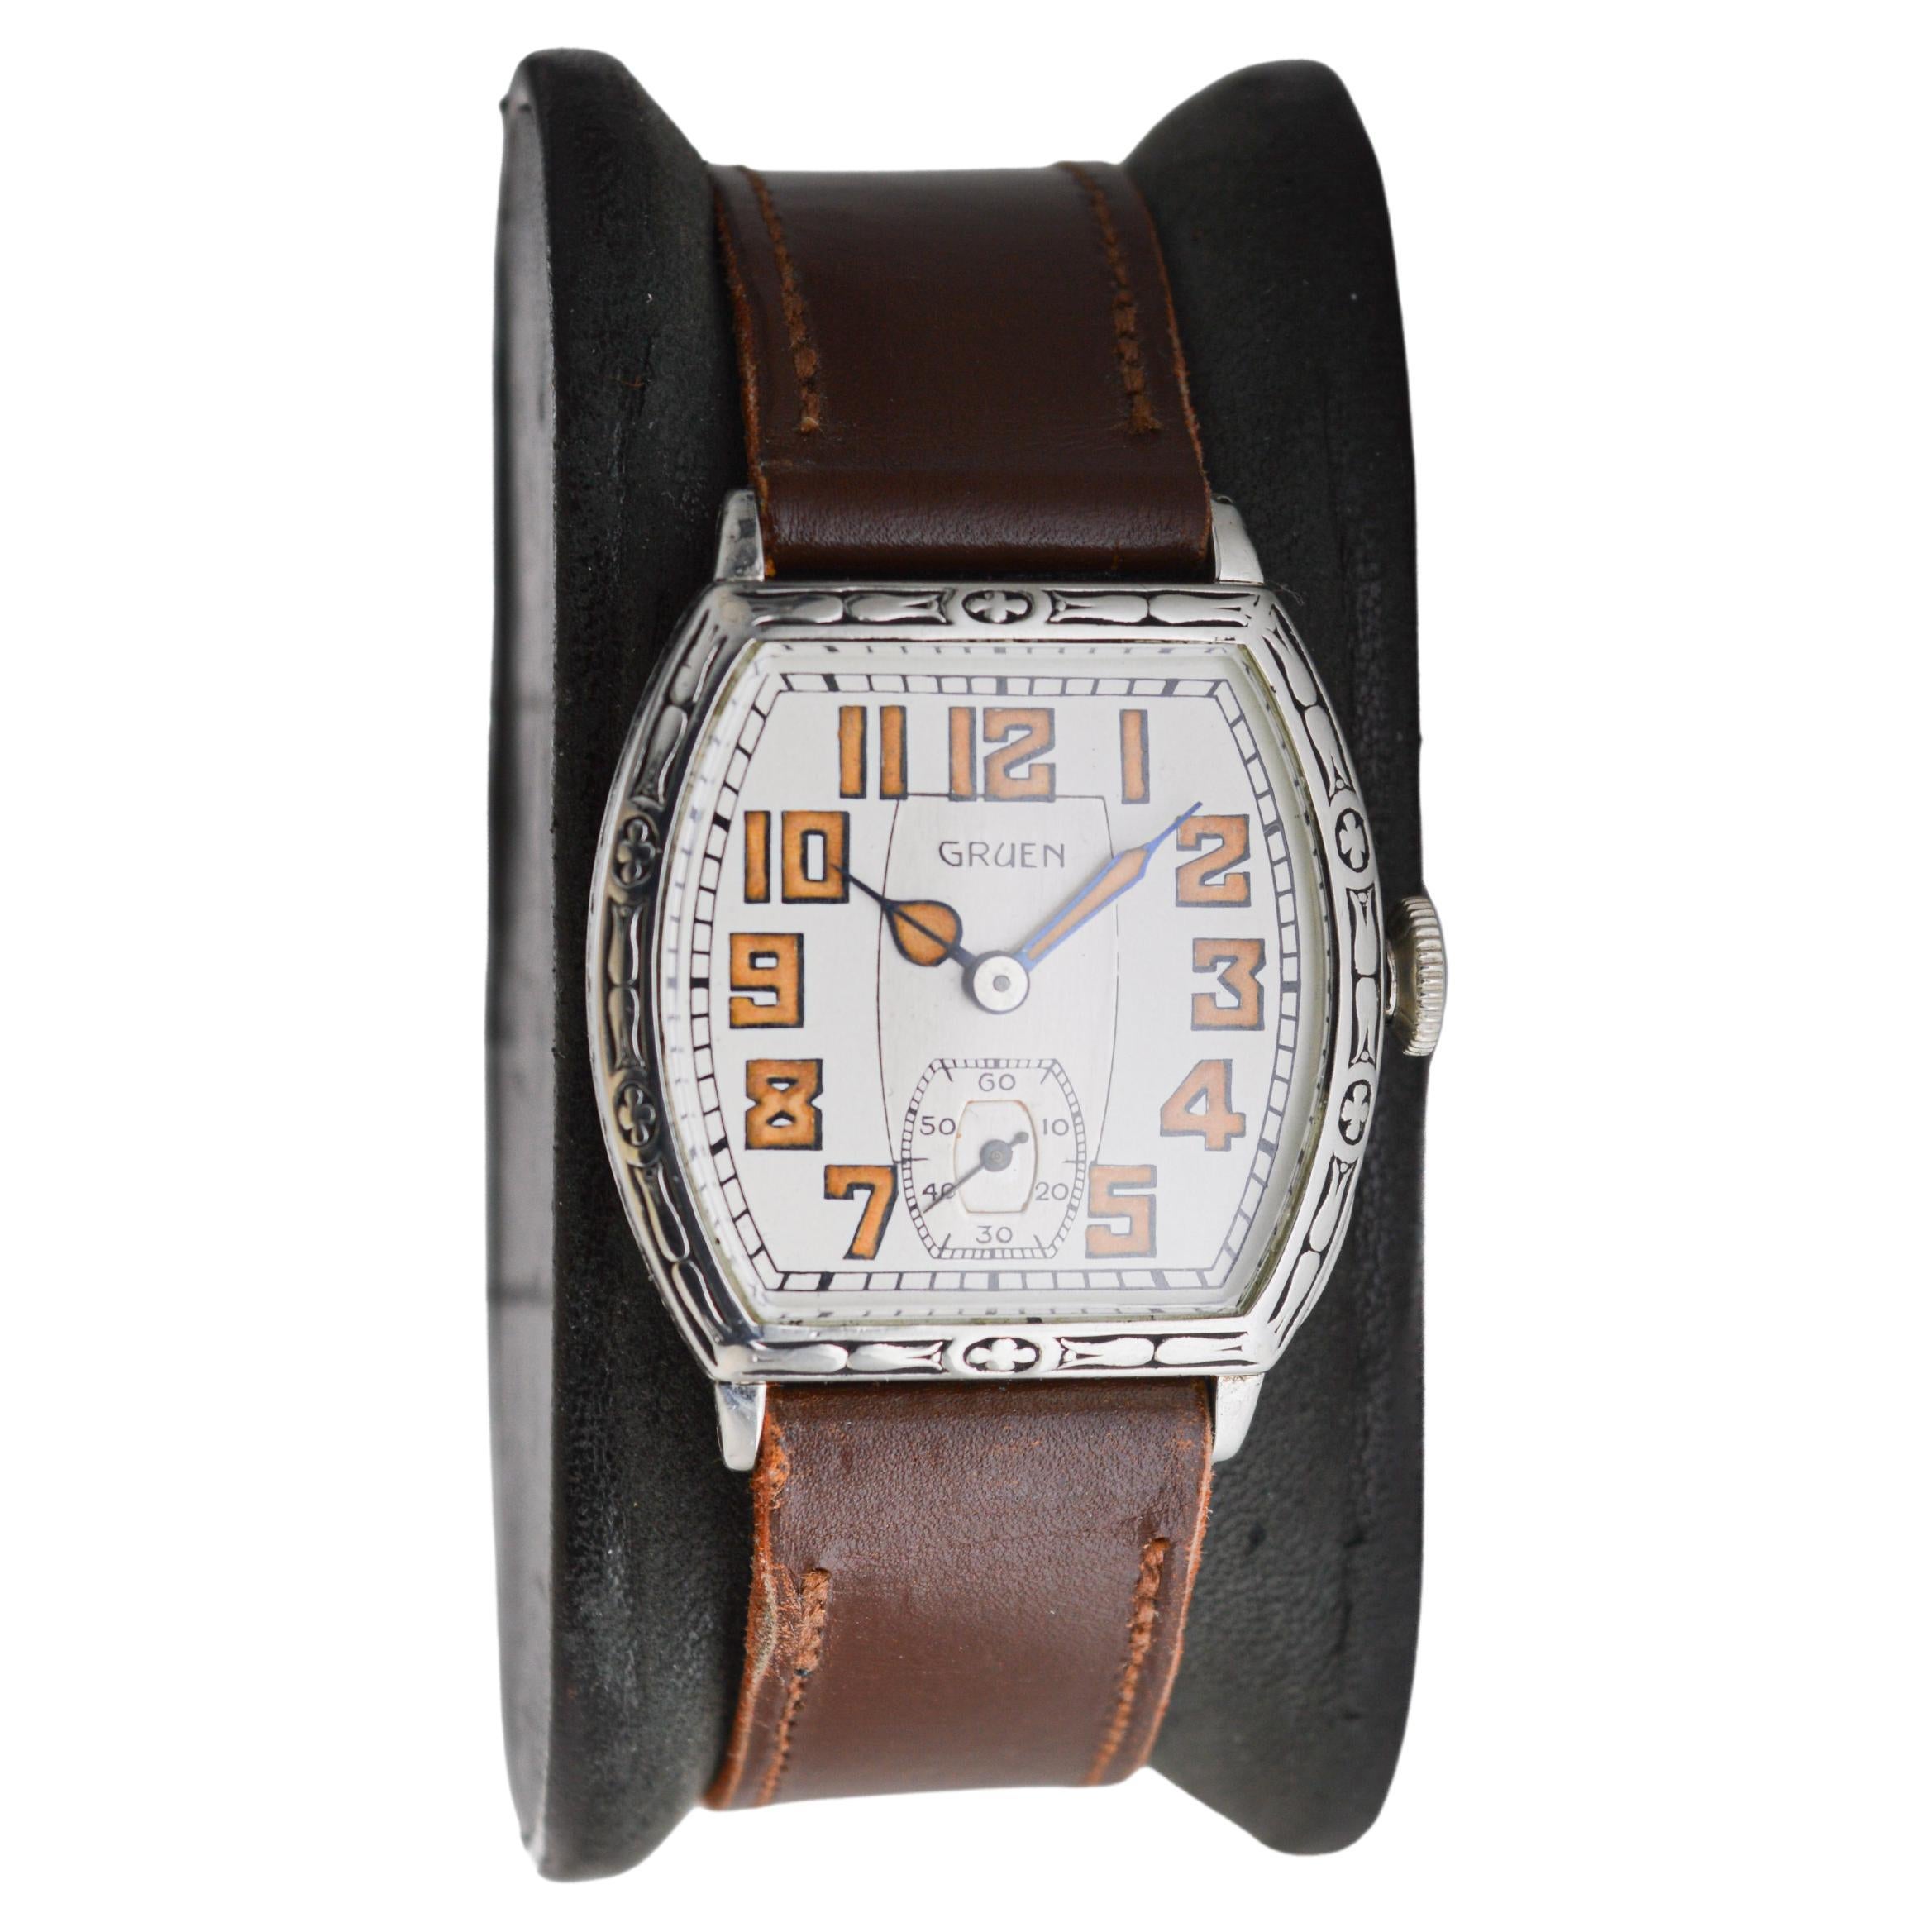 FACTORY / HOUSE: Gruen Watch Company
STYLE / REFERENCE: Art Deco Tonneau
METAL / MATERIAL: White Gold-filled
CIRCA / YEAR: 1925
DIMENSIONS / SIZE: Length 28mm X Diameter 35mm
MOVEMENT / CALIBER: Manual Winding / 15 Jewels / Caliber 885
DIAL / HANDS: